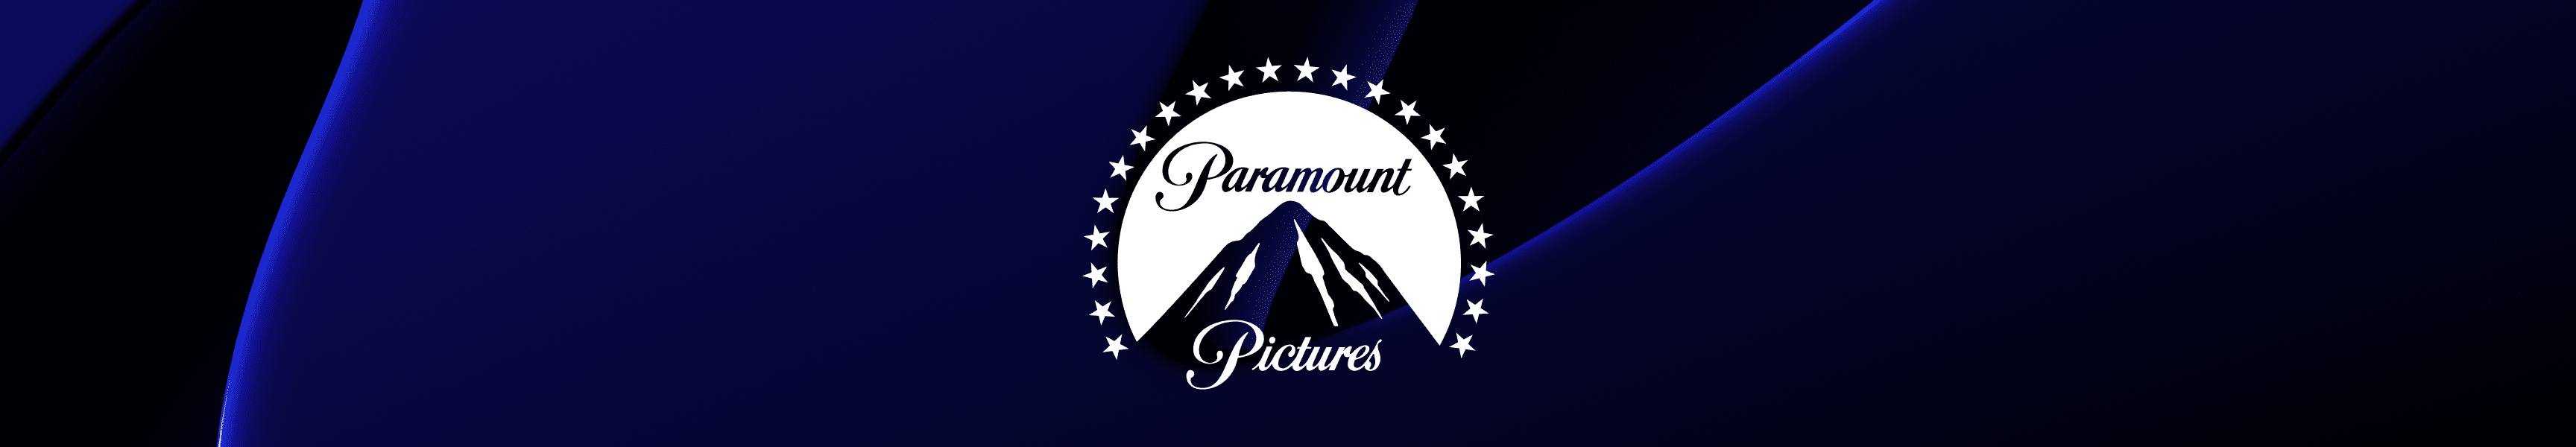 Paramount Pictures Tank Tops